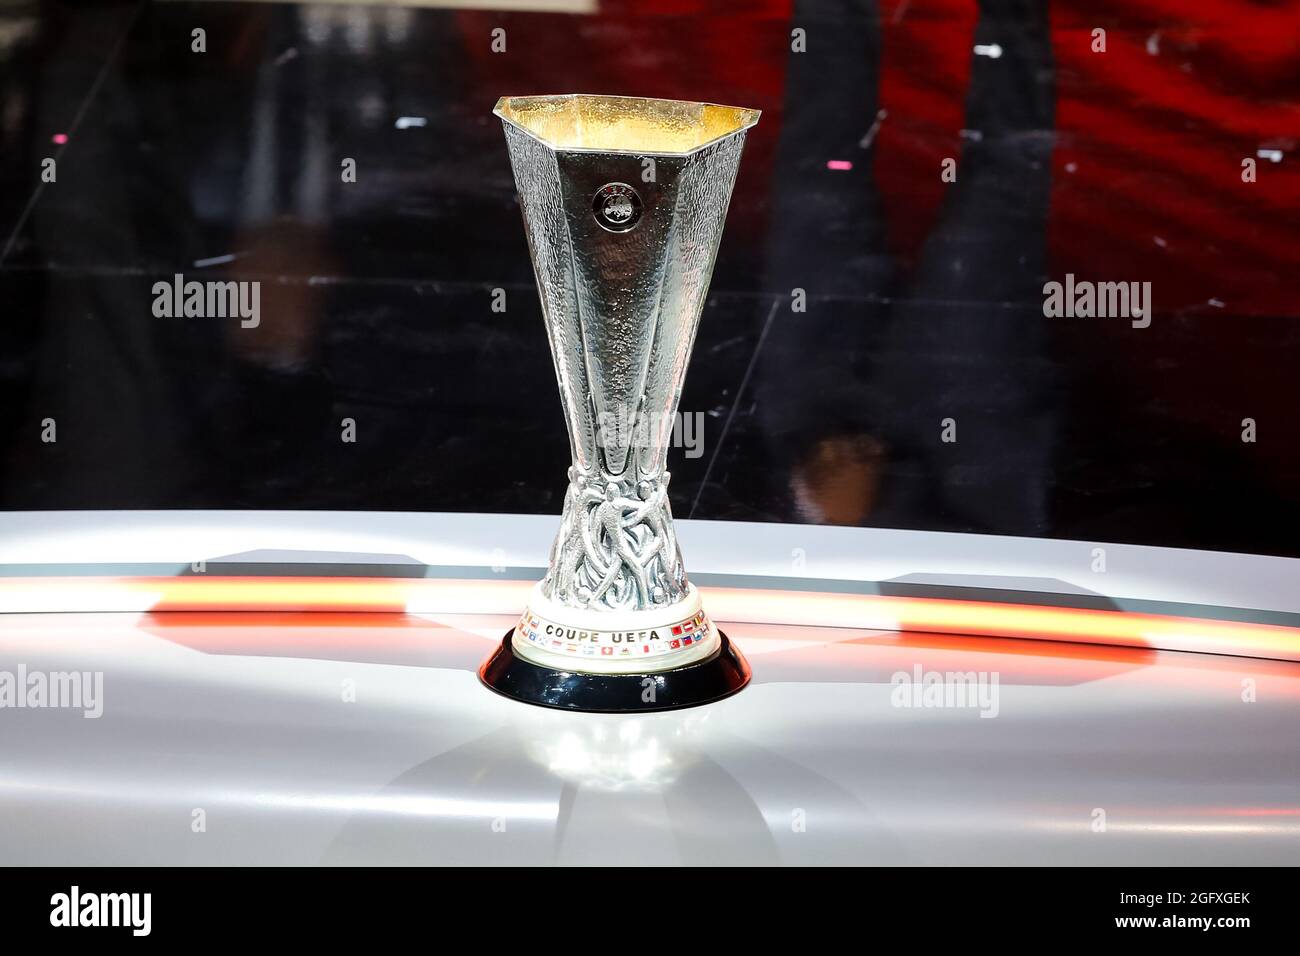 ISTANBUL, TURKEY - AUGUST 27: General view of the UEFA Europa League trophy during the UEFA Europa League 2021/22 Group Stage Draw at the Halic Congress Center on August 27, 2021 in Istanbul, Turkey. (Photo by Orange Pictures) Stock Photo